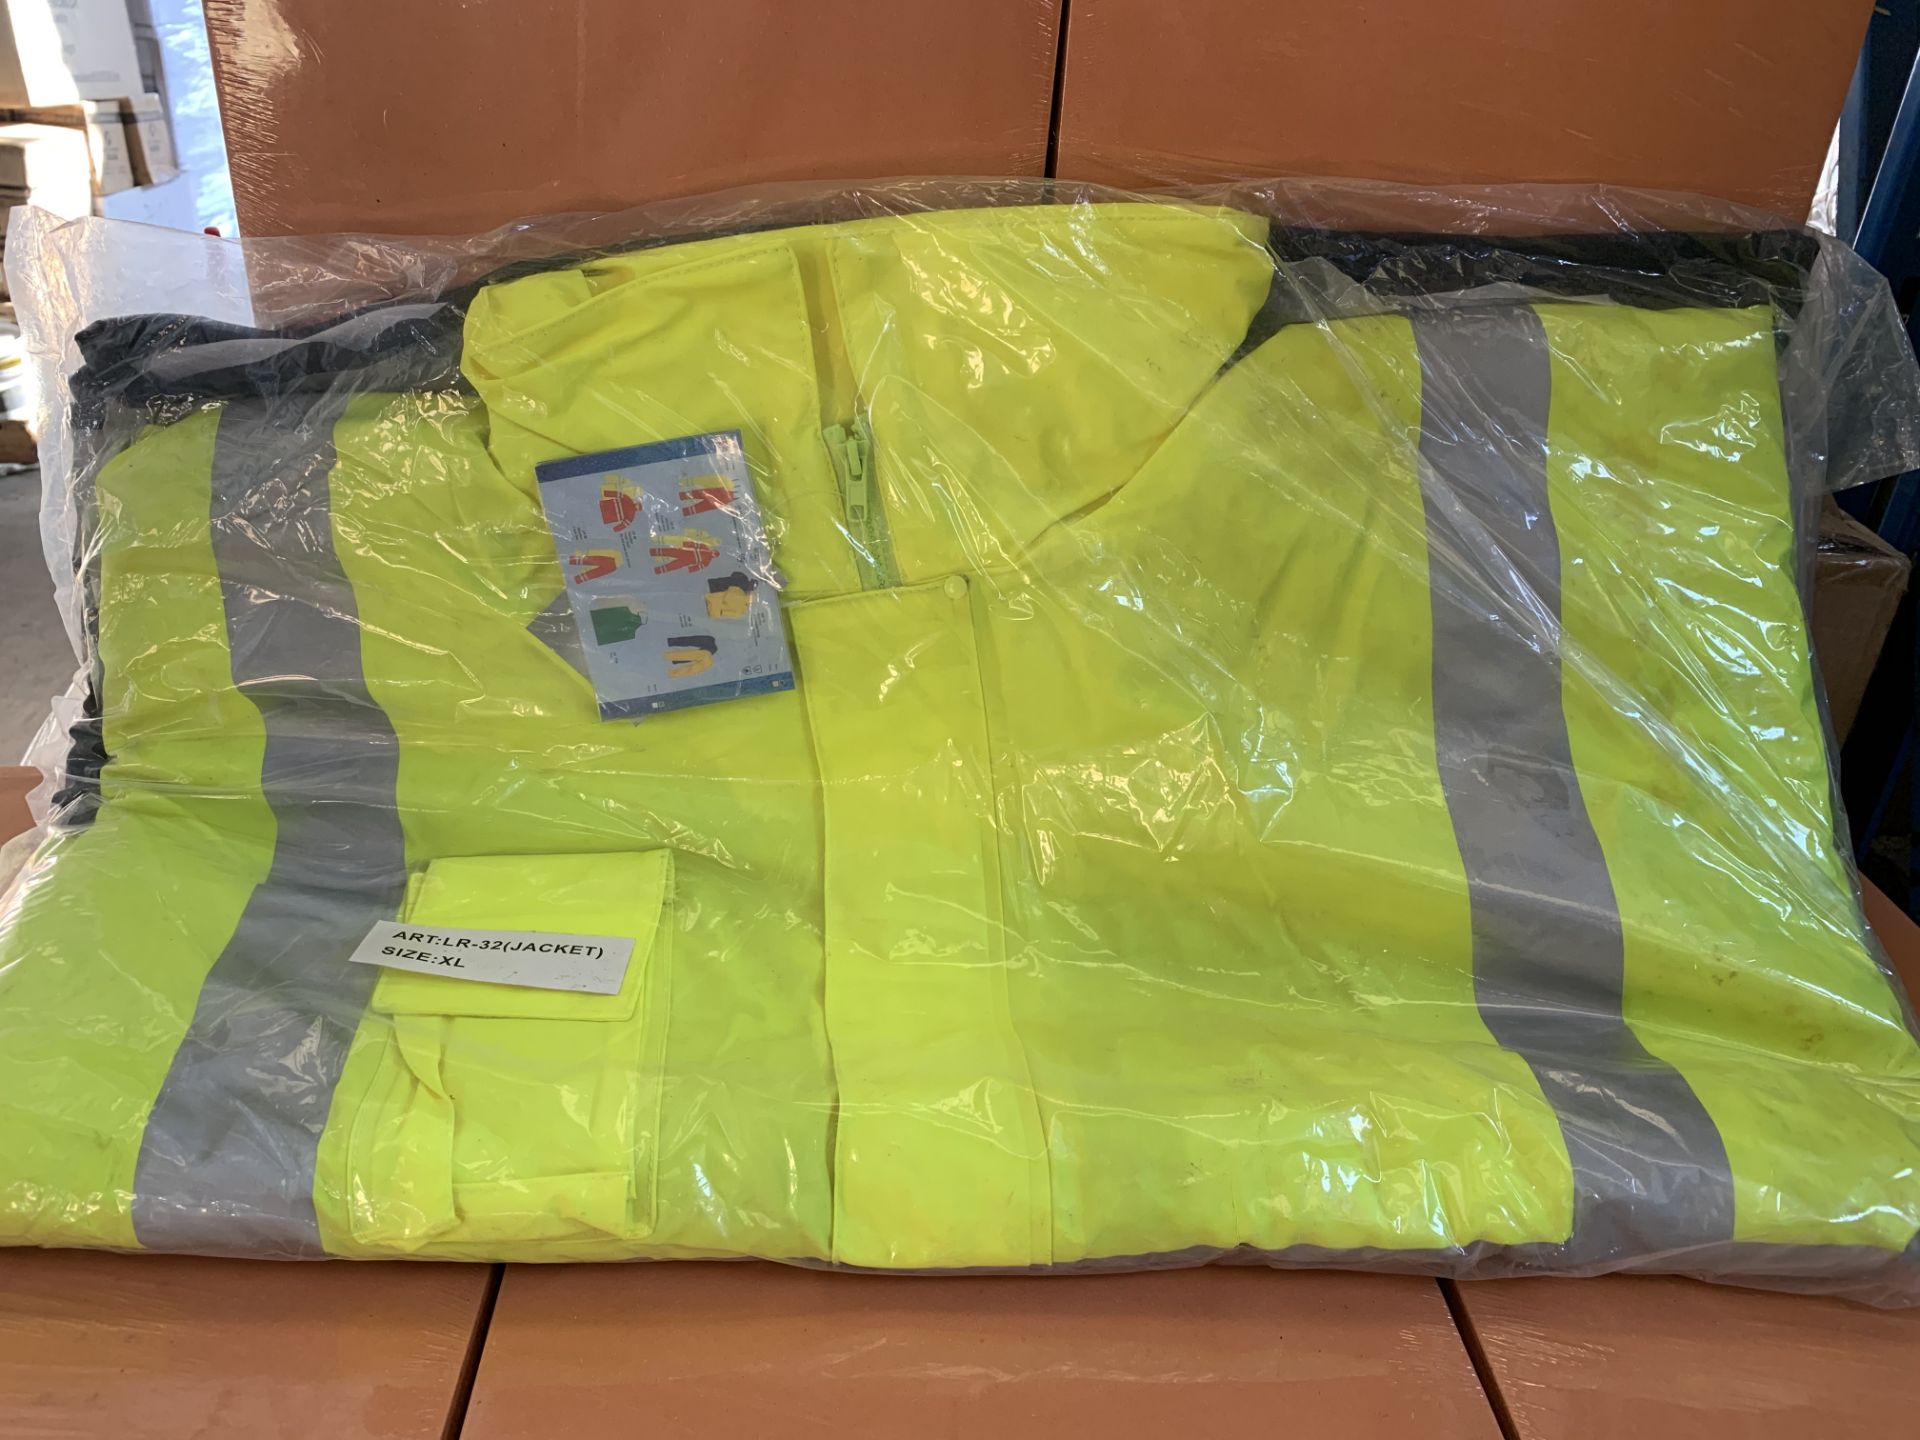 10 X HIGH VIS WORK JACKETS SIZE EXTRA LARGE